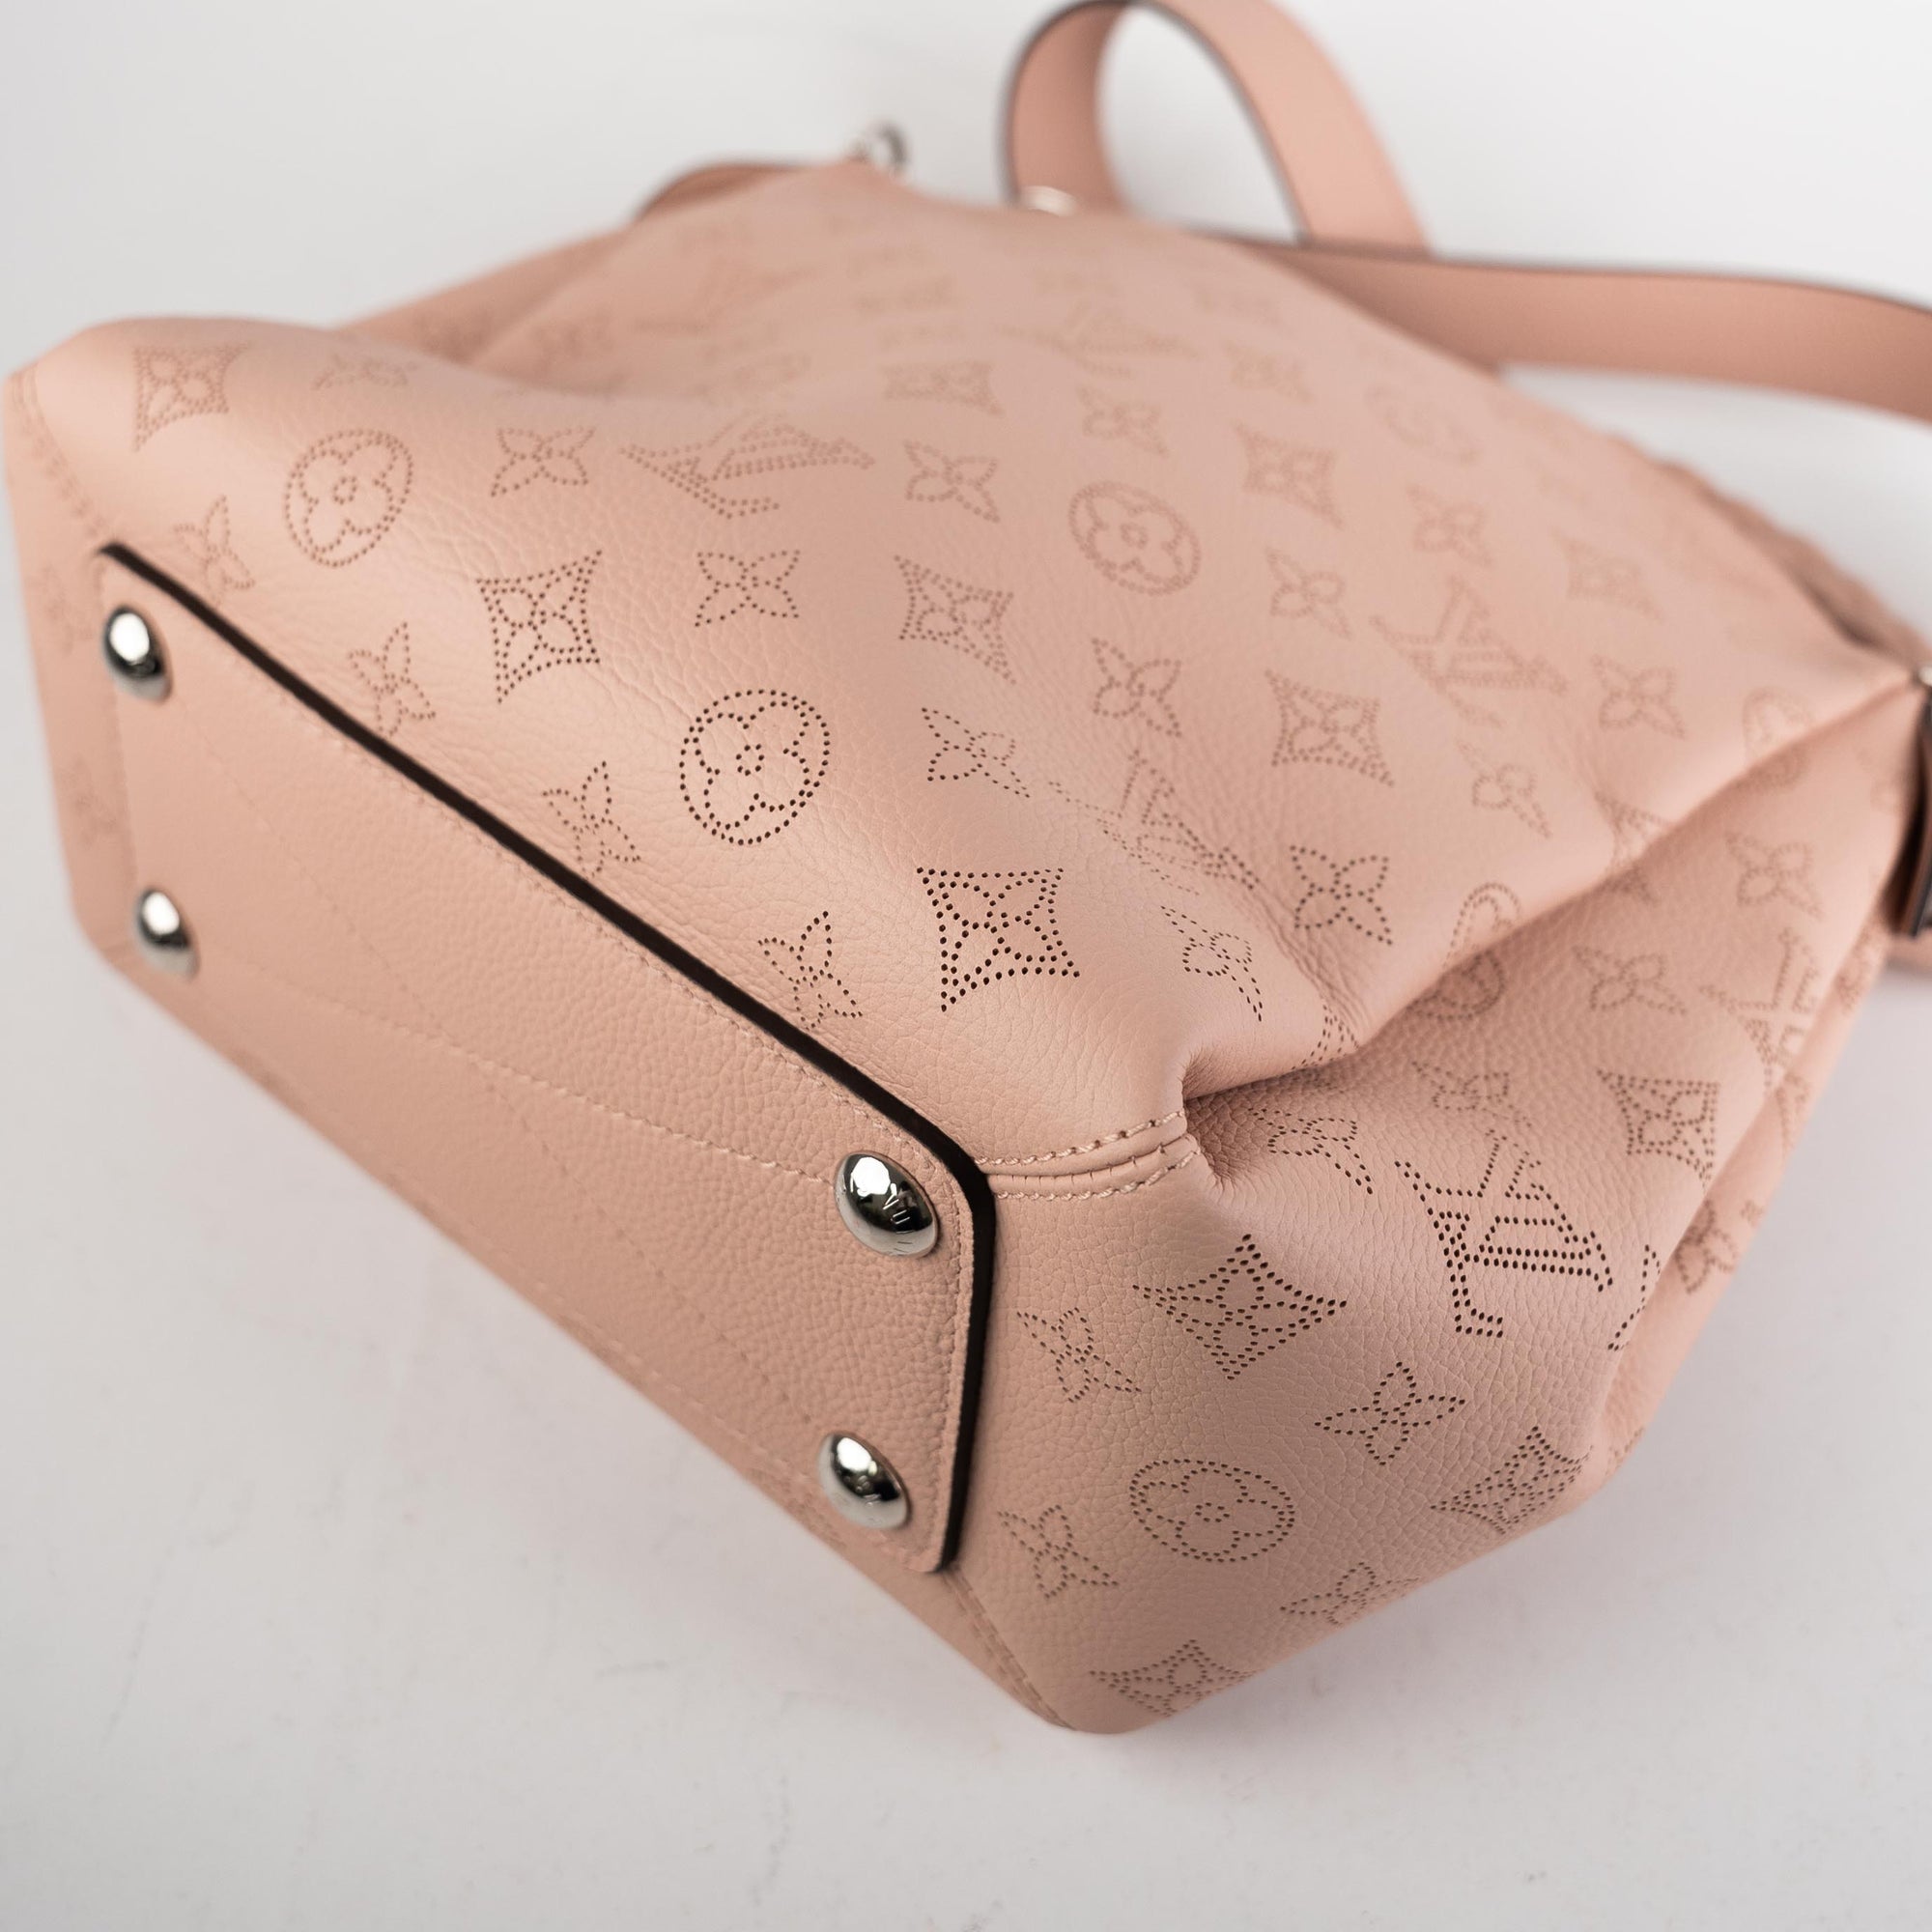 Explore Our Exciting Line of Louis Vuitton 2015 Pink Leather Mahina  Babylone Crossbody Bag Louis Vuitton . Unique Designs that You Won't See  Anywhere Else